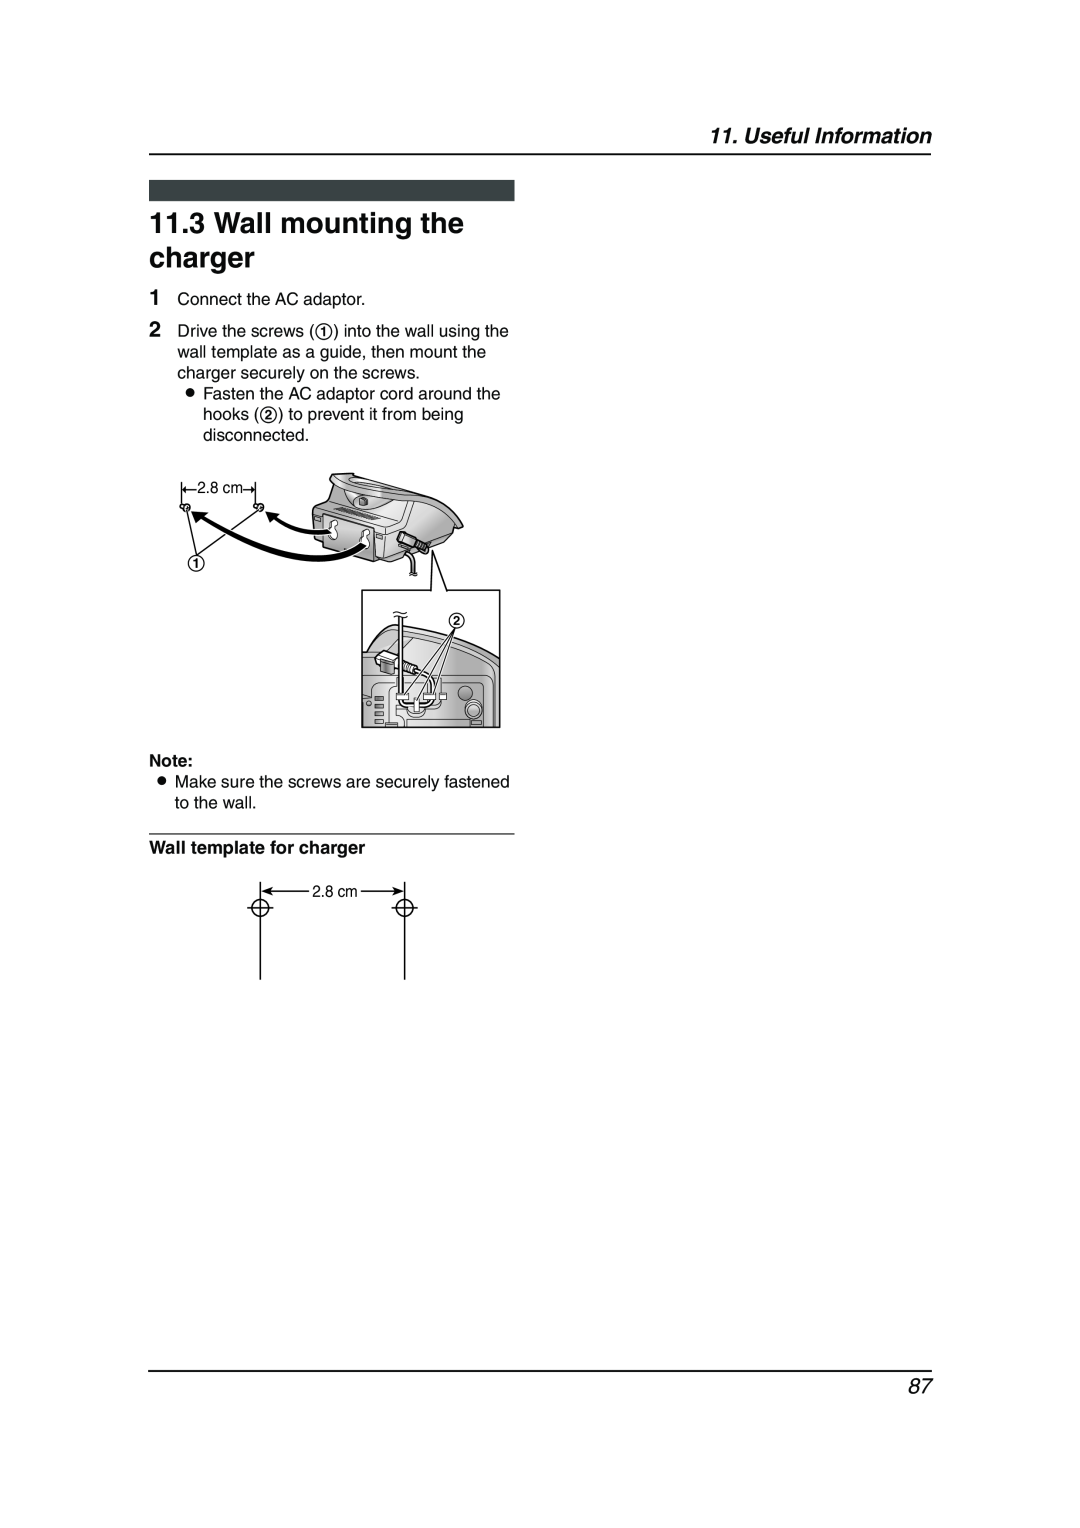 Panasonic KX-FC241AL manual Wall mounting the charger, Wall template for charger, Useful Information 